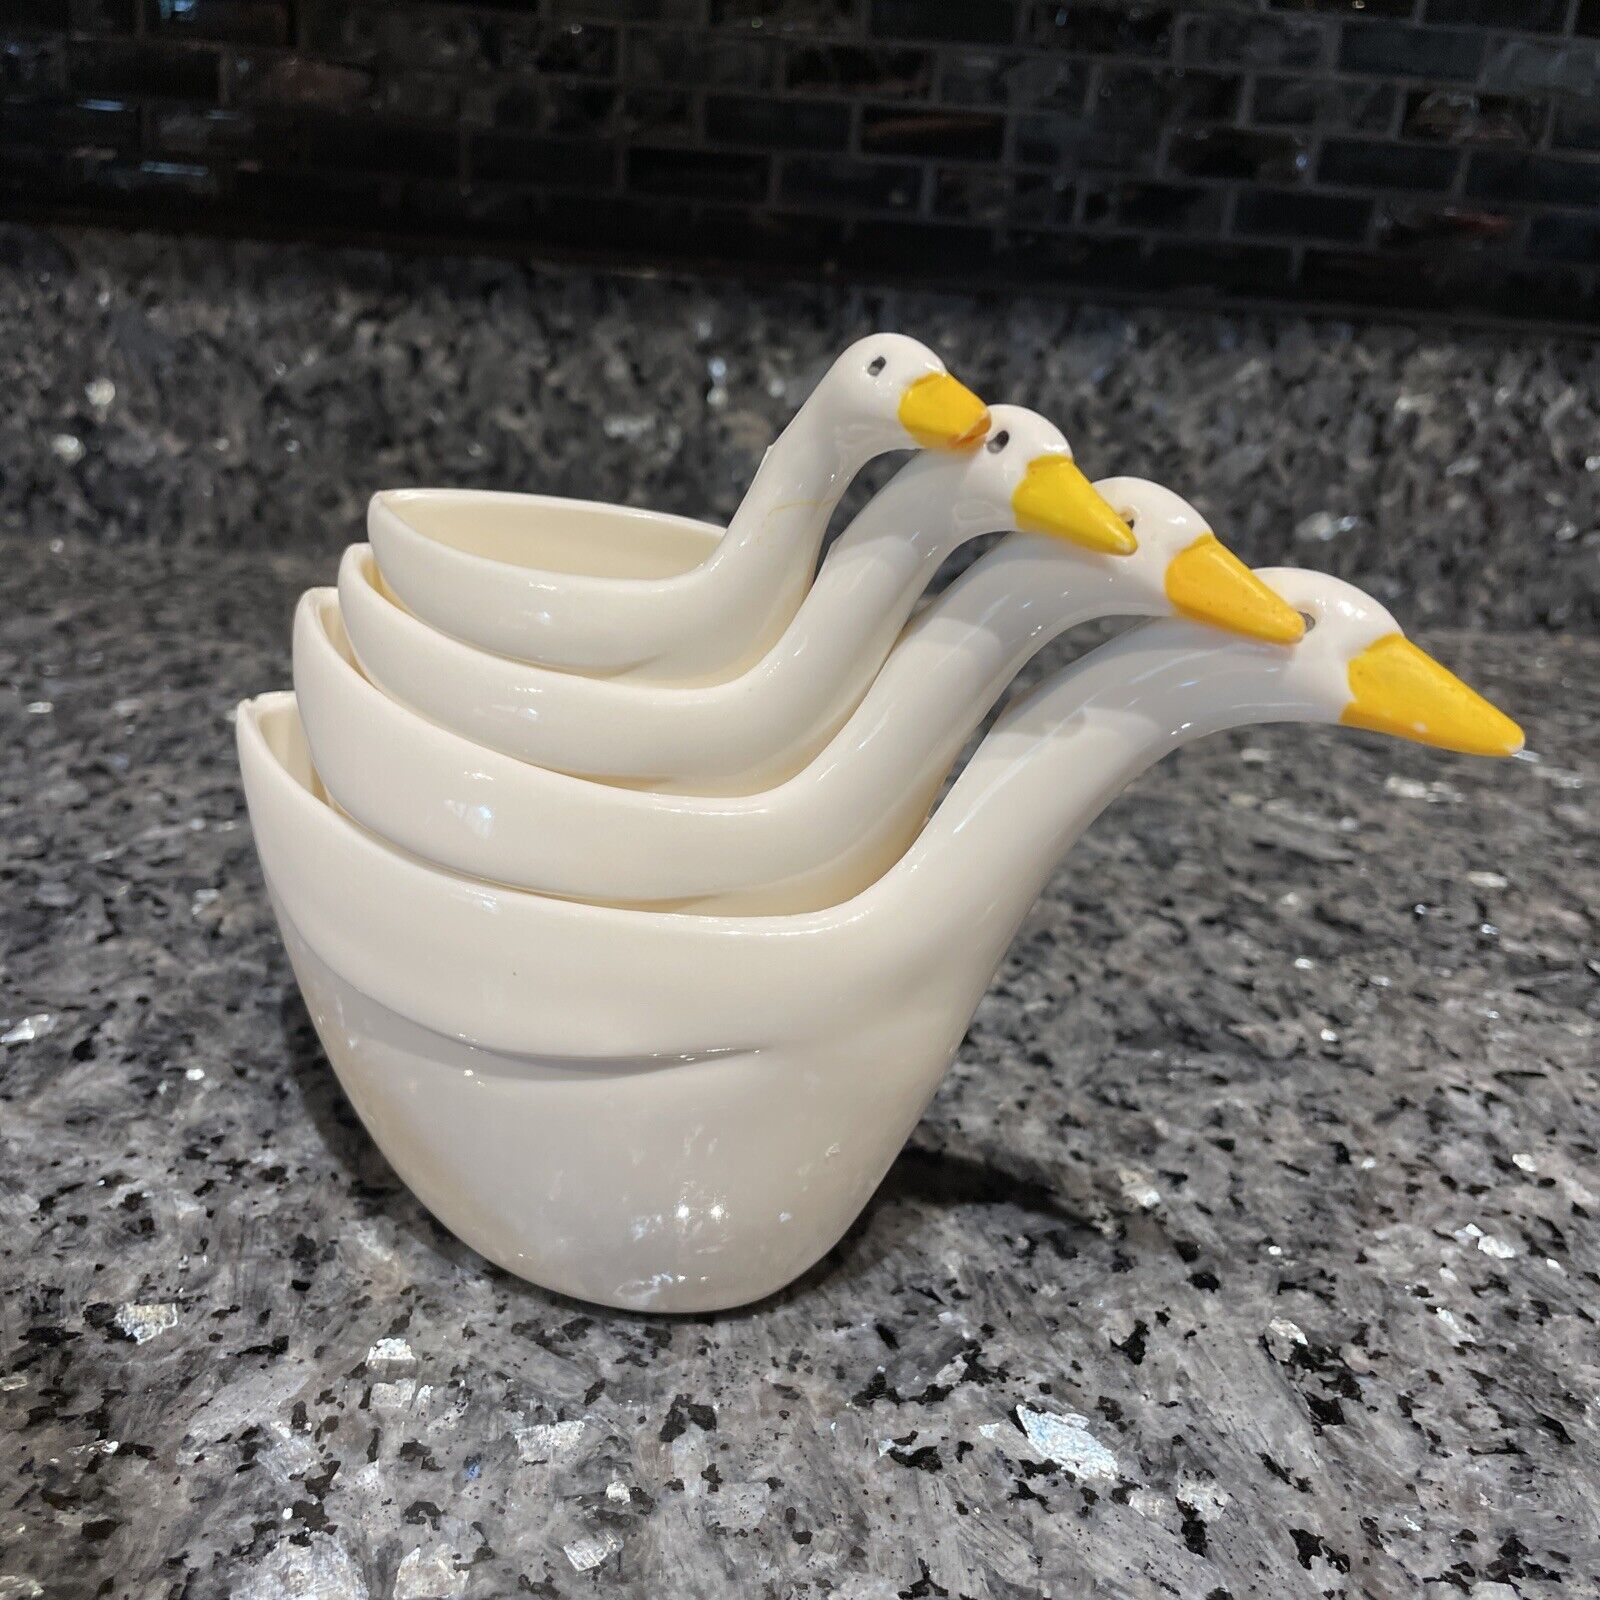 4 Pc Set Vintage JSNY Plastic Stacking White Ducks Geese Measuring Cups